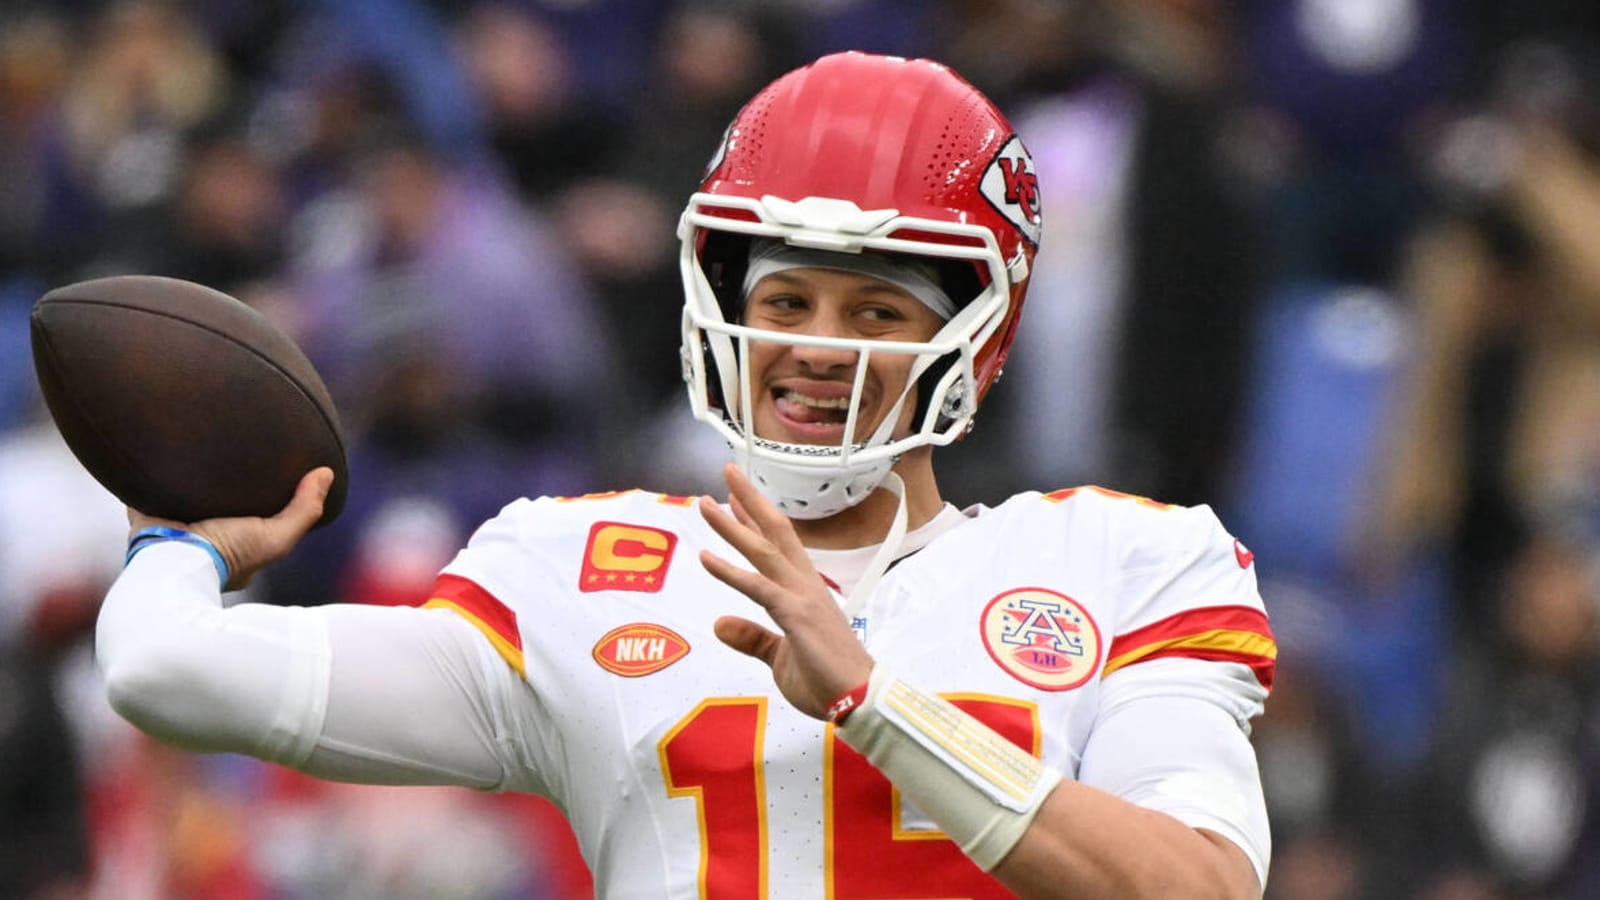 Patrick Mahomes addresses playing the role of villain